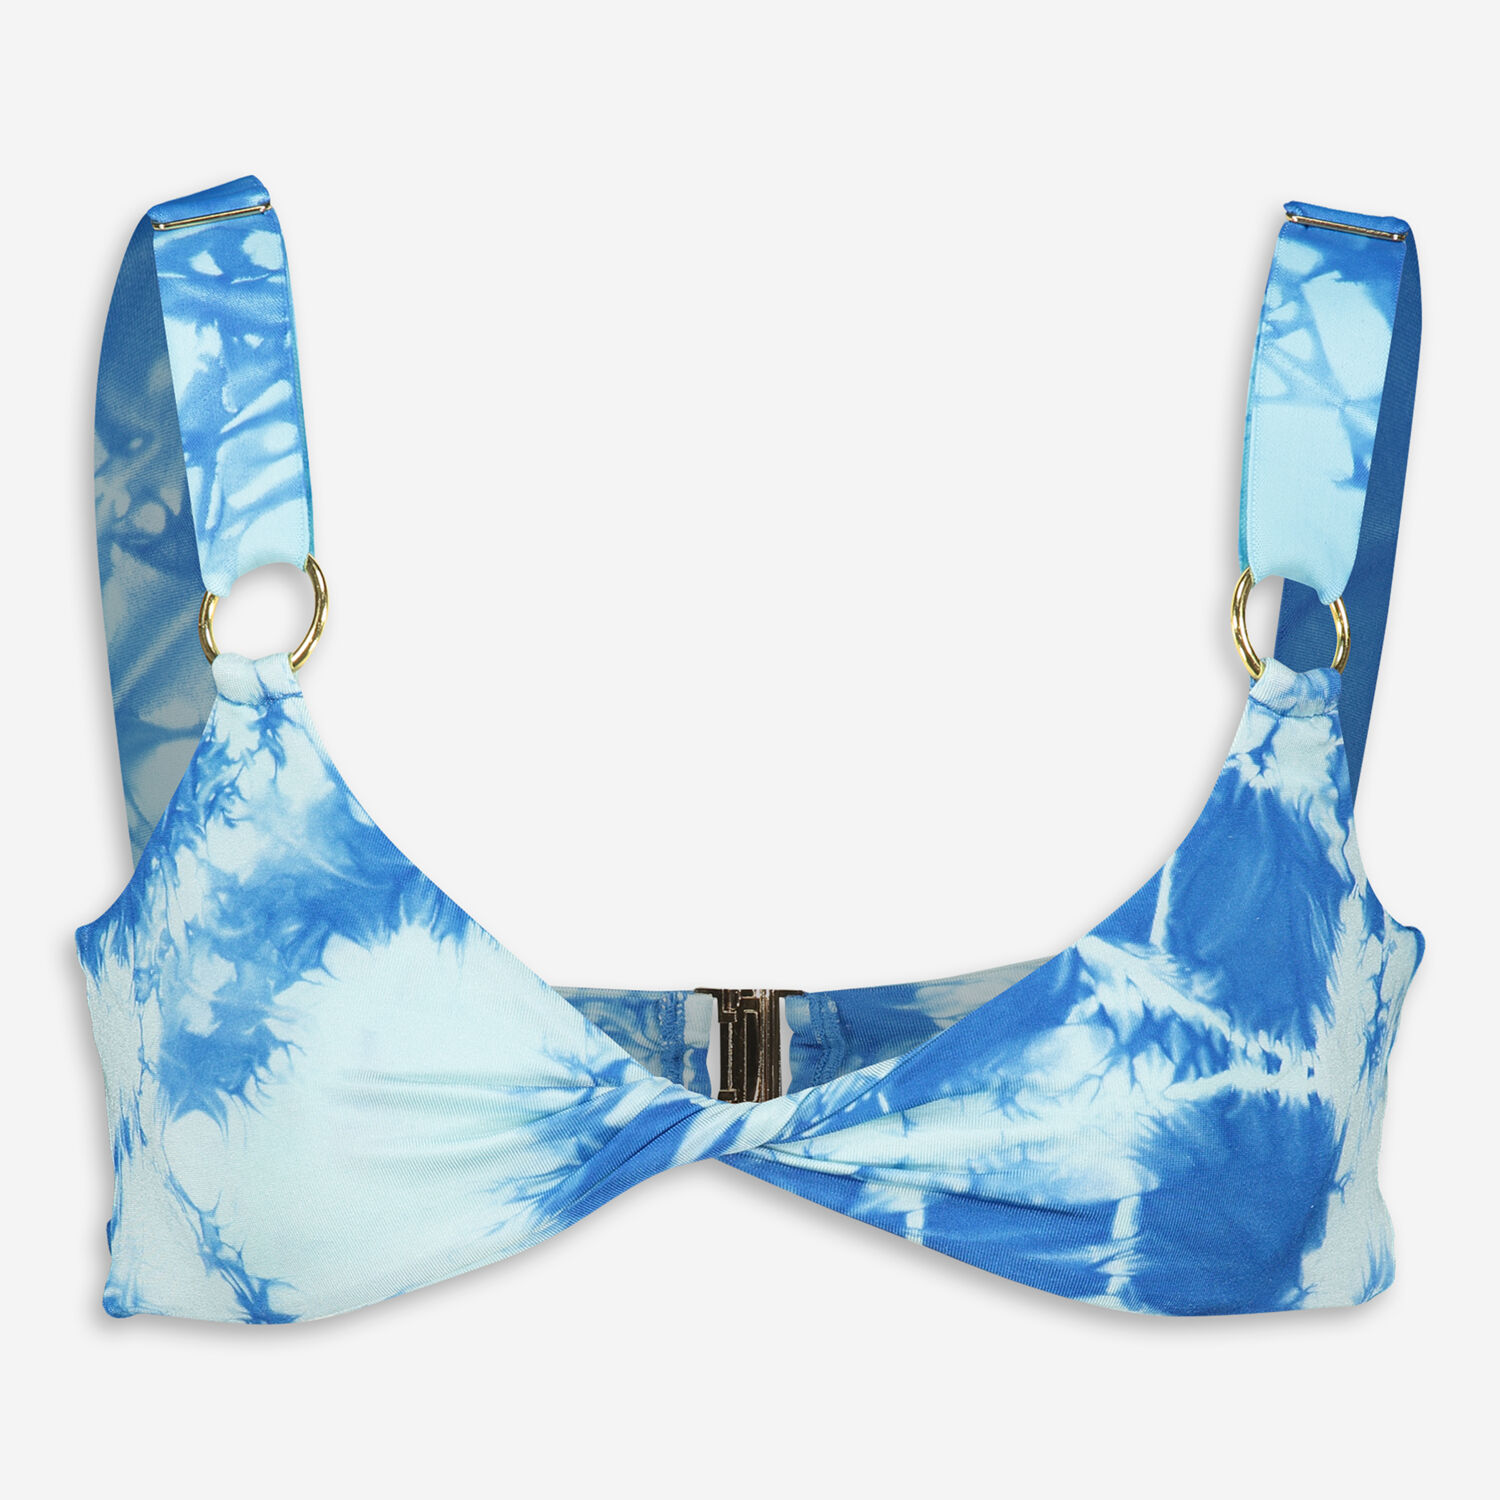 Featherweight Sleep Bralette Powered by TurboWick™ - Storm Blue